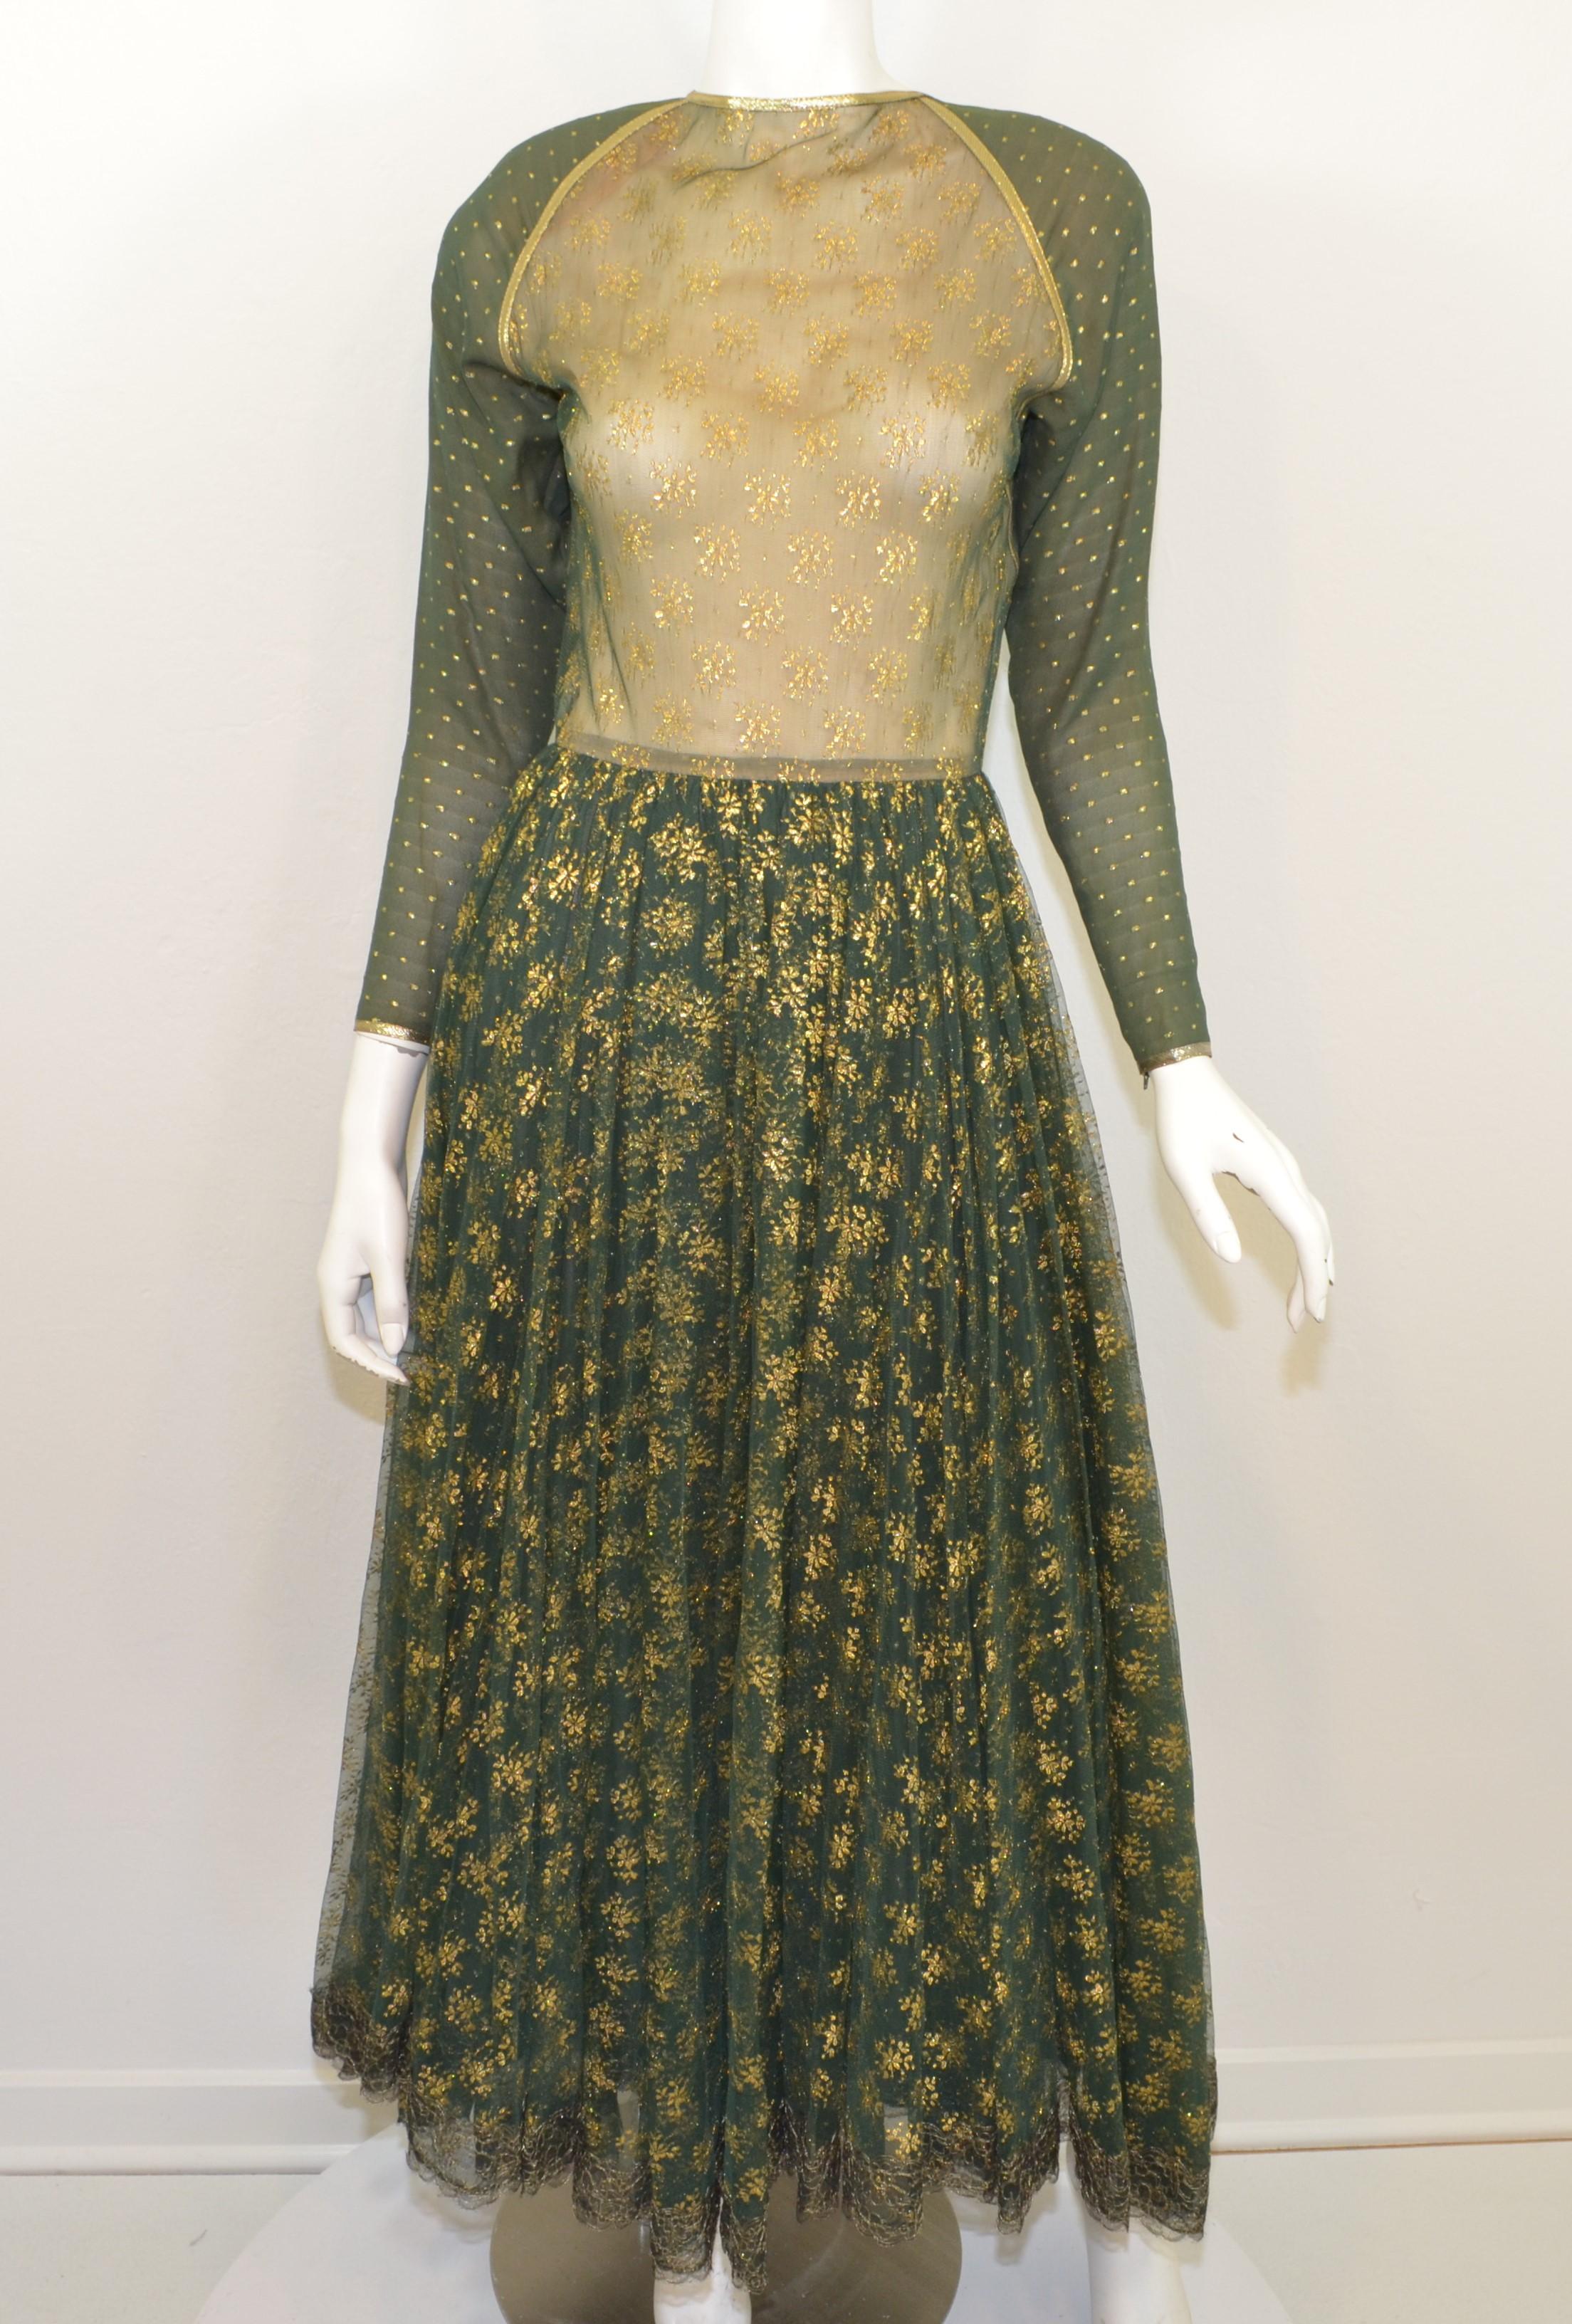 Geoffrey Beene gown featured in a forest green with gold threading throughout. Dress has a back zipper closure with buttons, sleeves have zippers along the cuffs.

Bust 30”
Waist 25”
Hips 42”
Length 54”